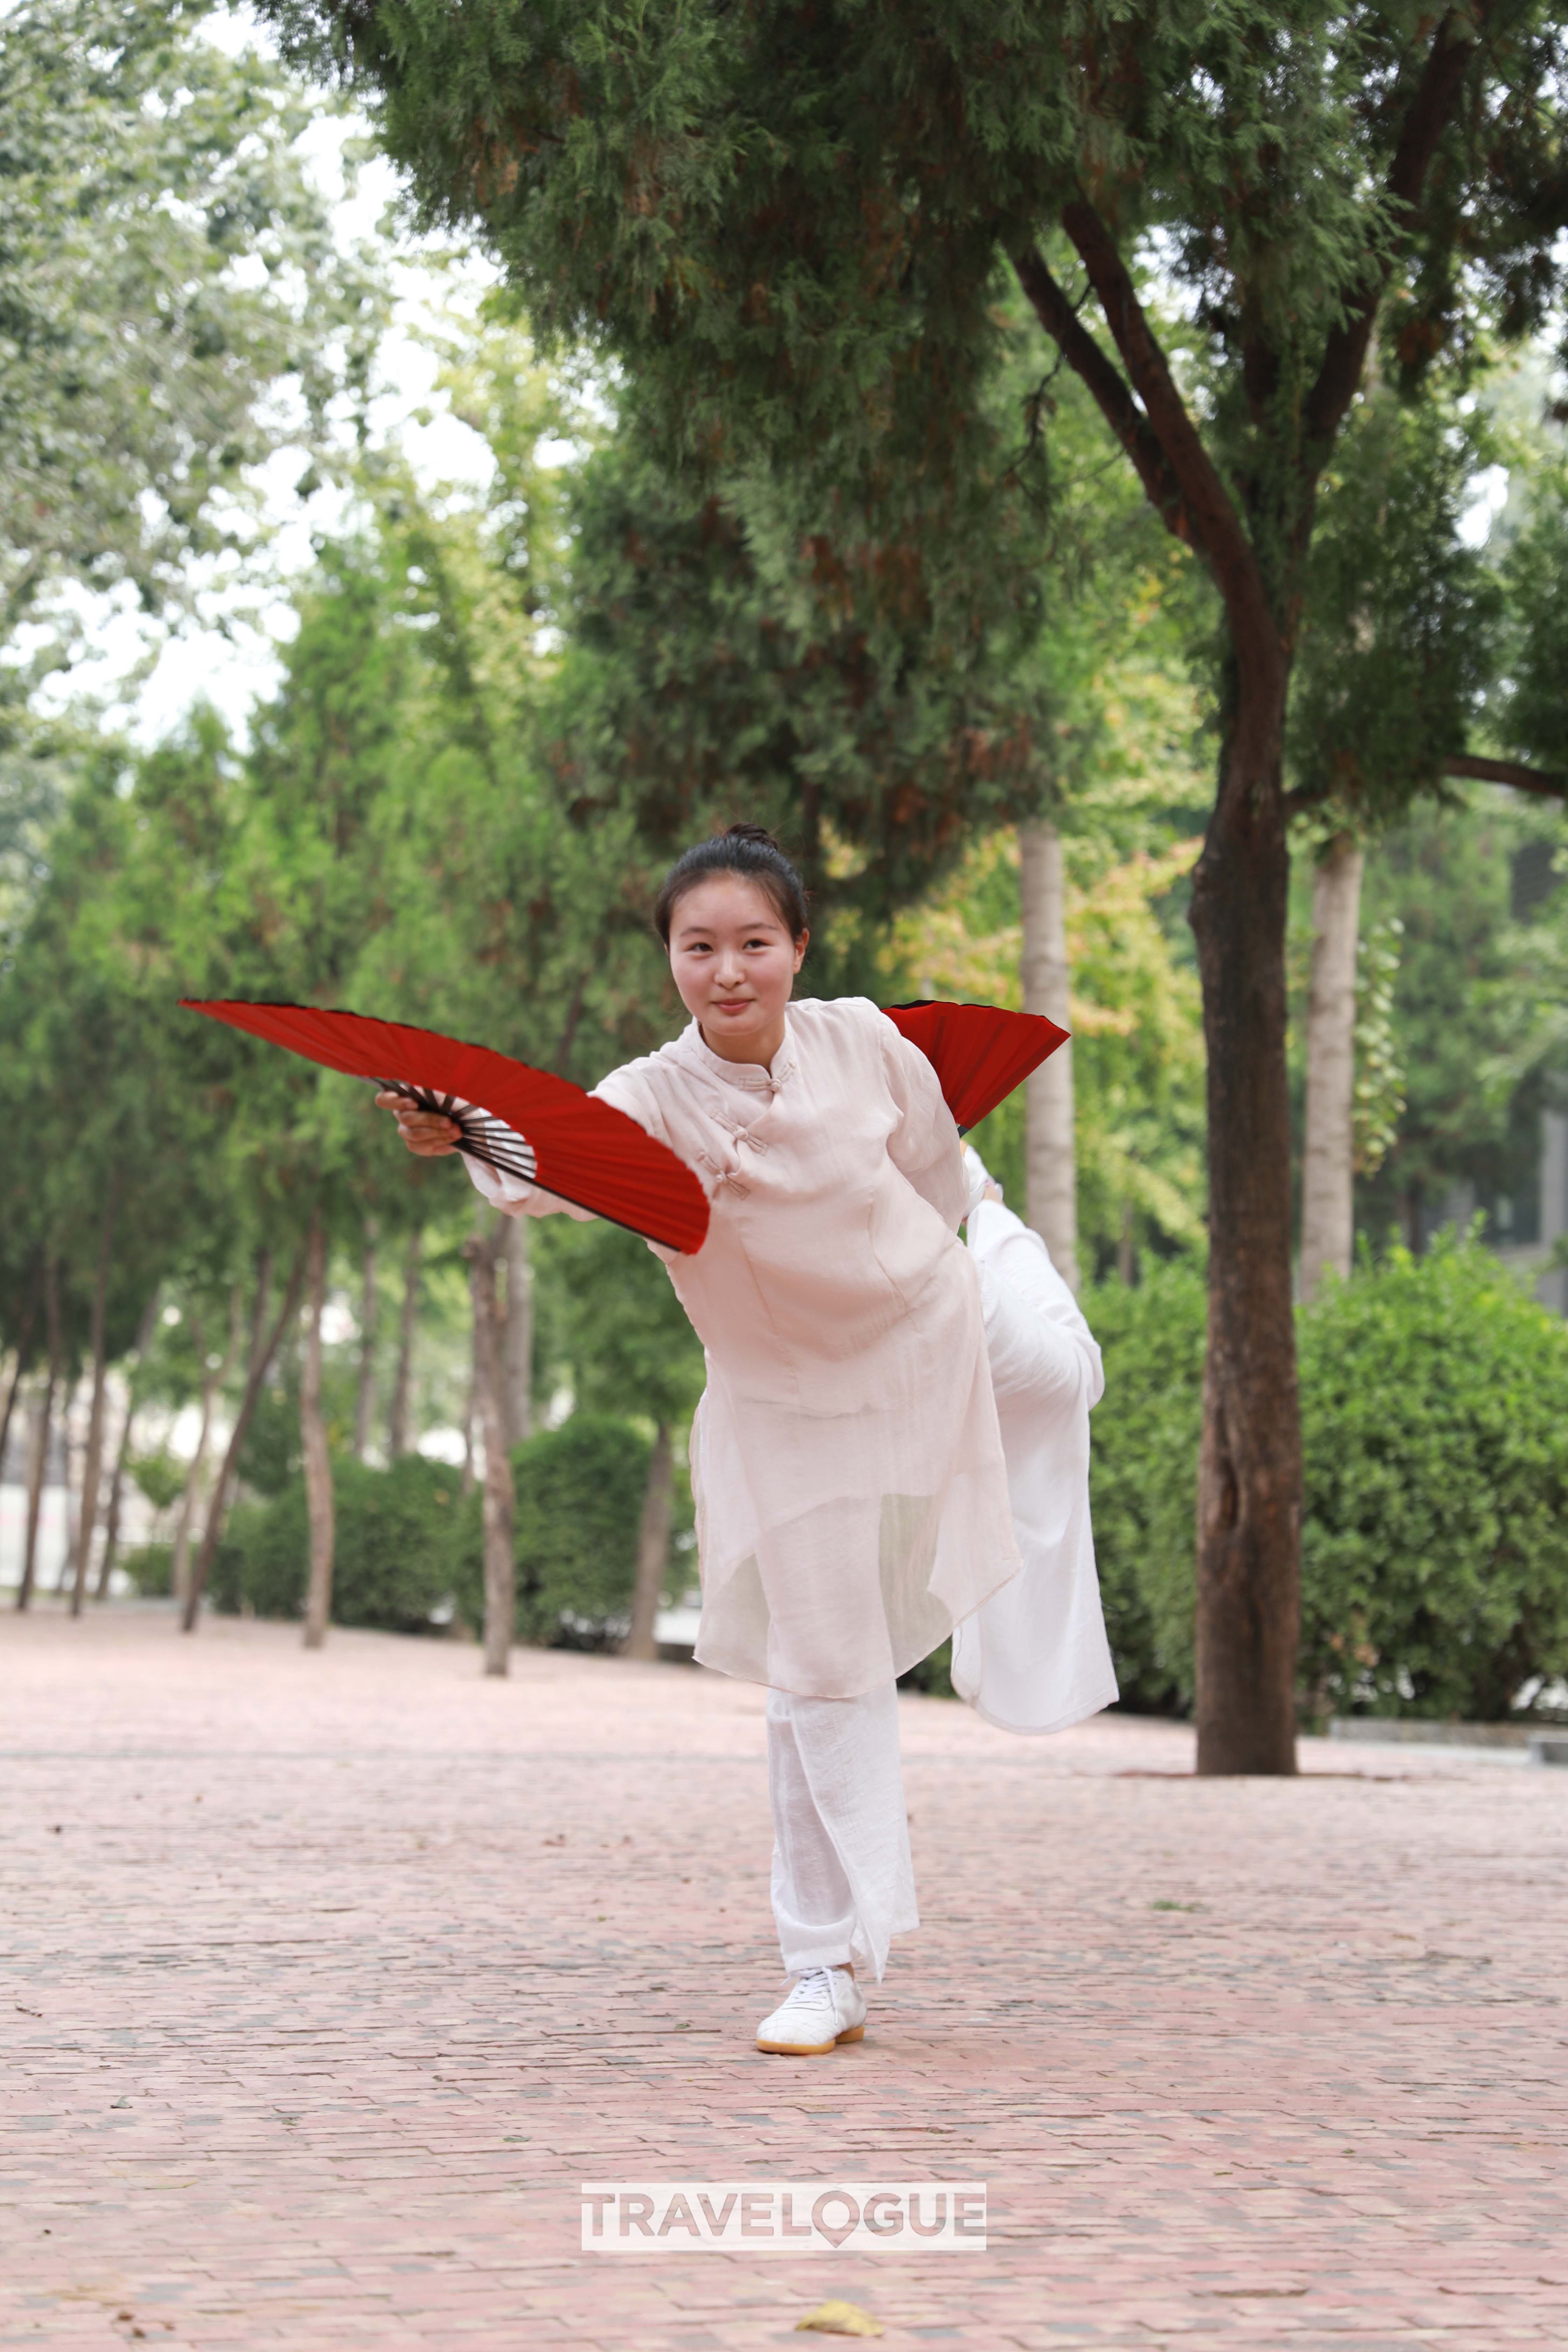 In Tai Chi, strength is found in softness, and power is harnessed through gentle movements. /CGTN